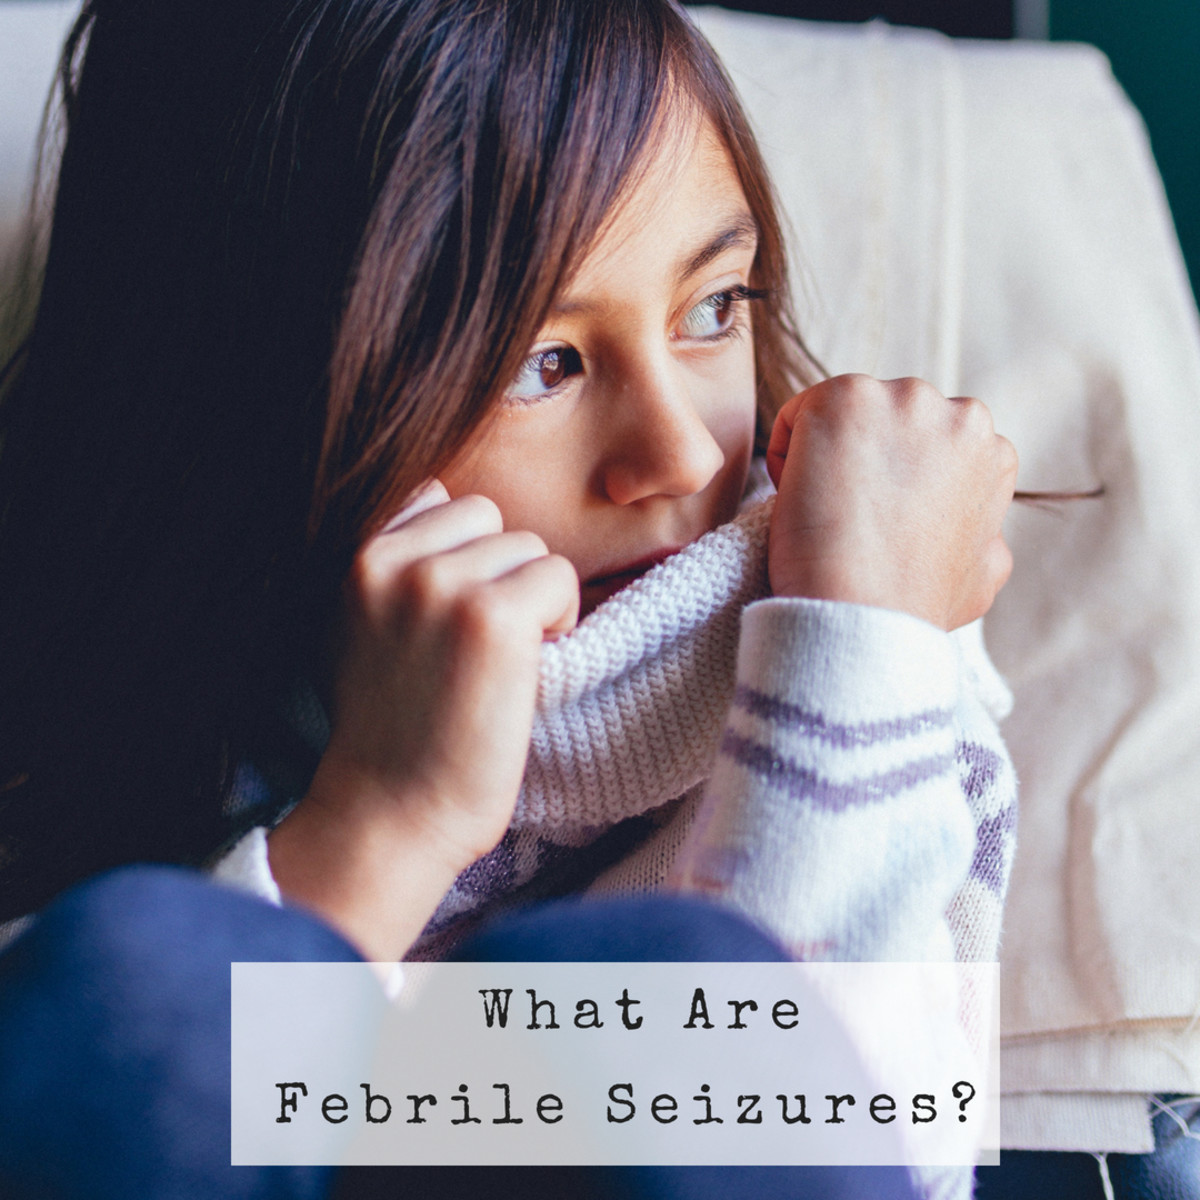 Febrile seizures occur in 3% of children between the ages of six months and six years.